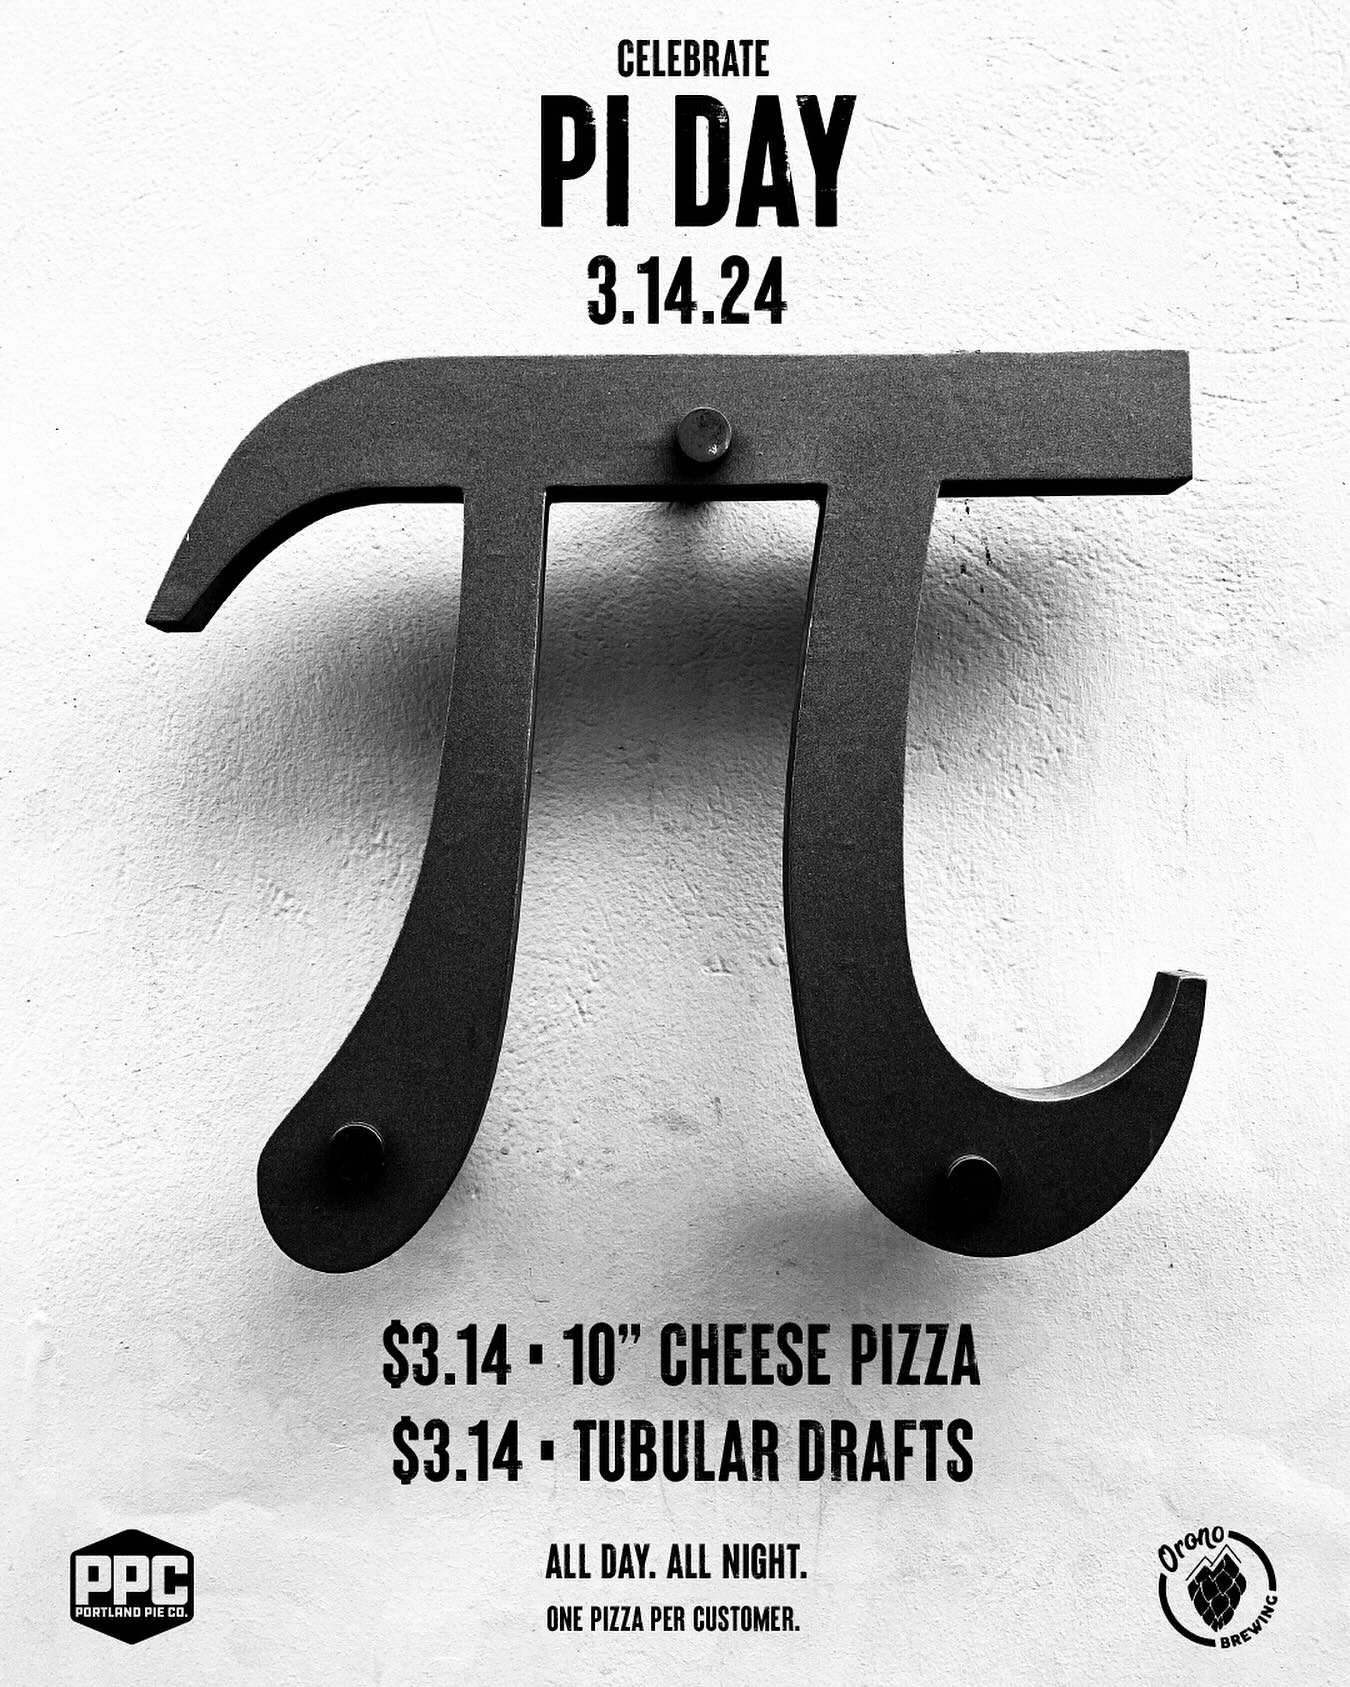 Tomorrow. It&rsquo;s our way of saying &lsquo;Thank You&rsquo; for all your support all year long. Meet you at the Pie.

One pizza per customer. Dine-in only.

#portlandpieco #pizza #mainepizza #piday #oronobrewingcompany